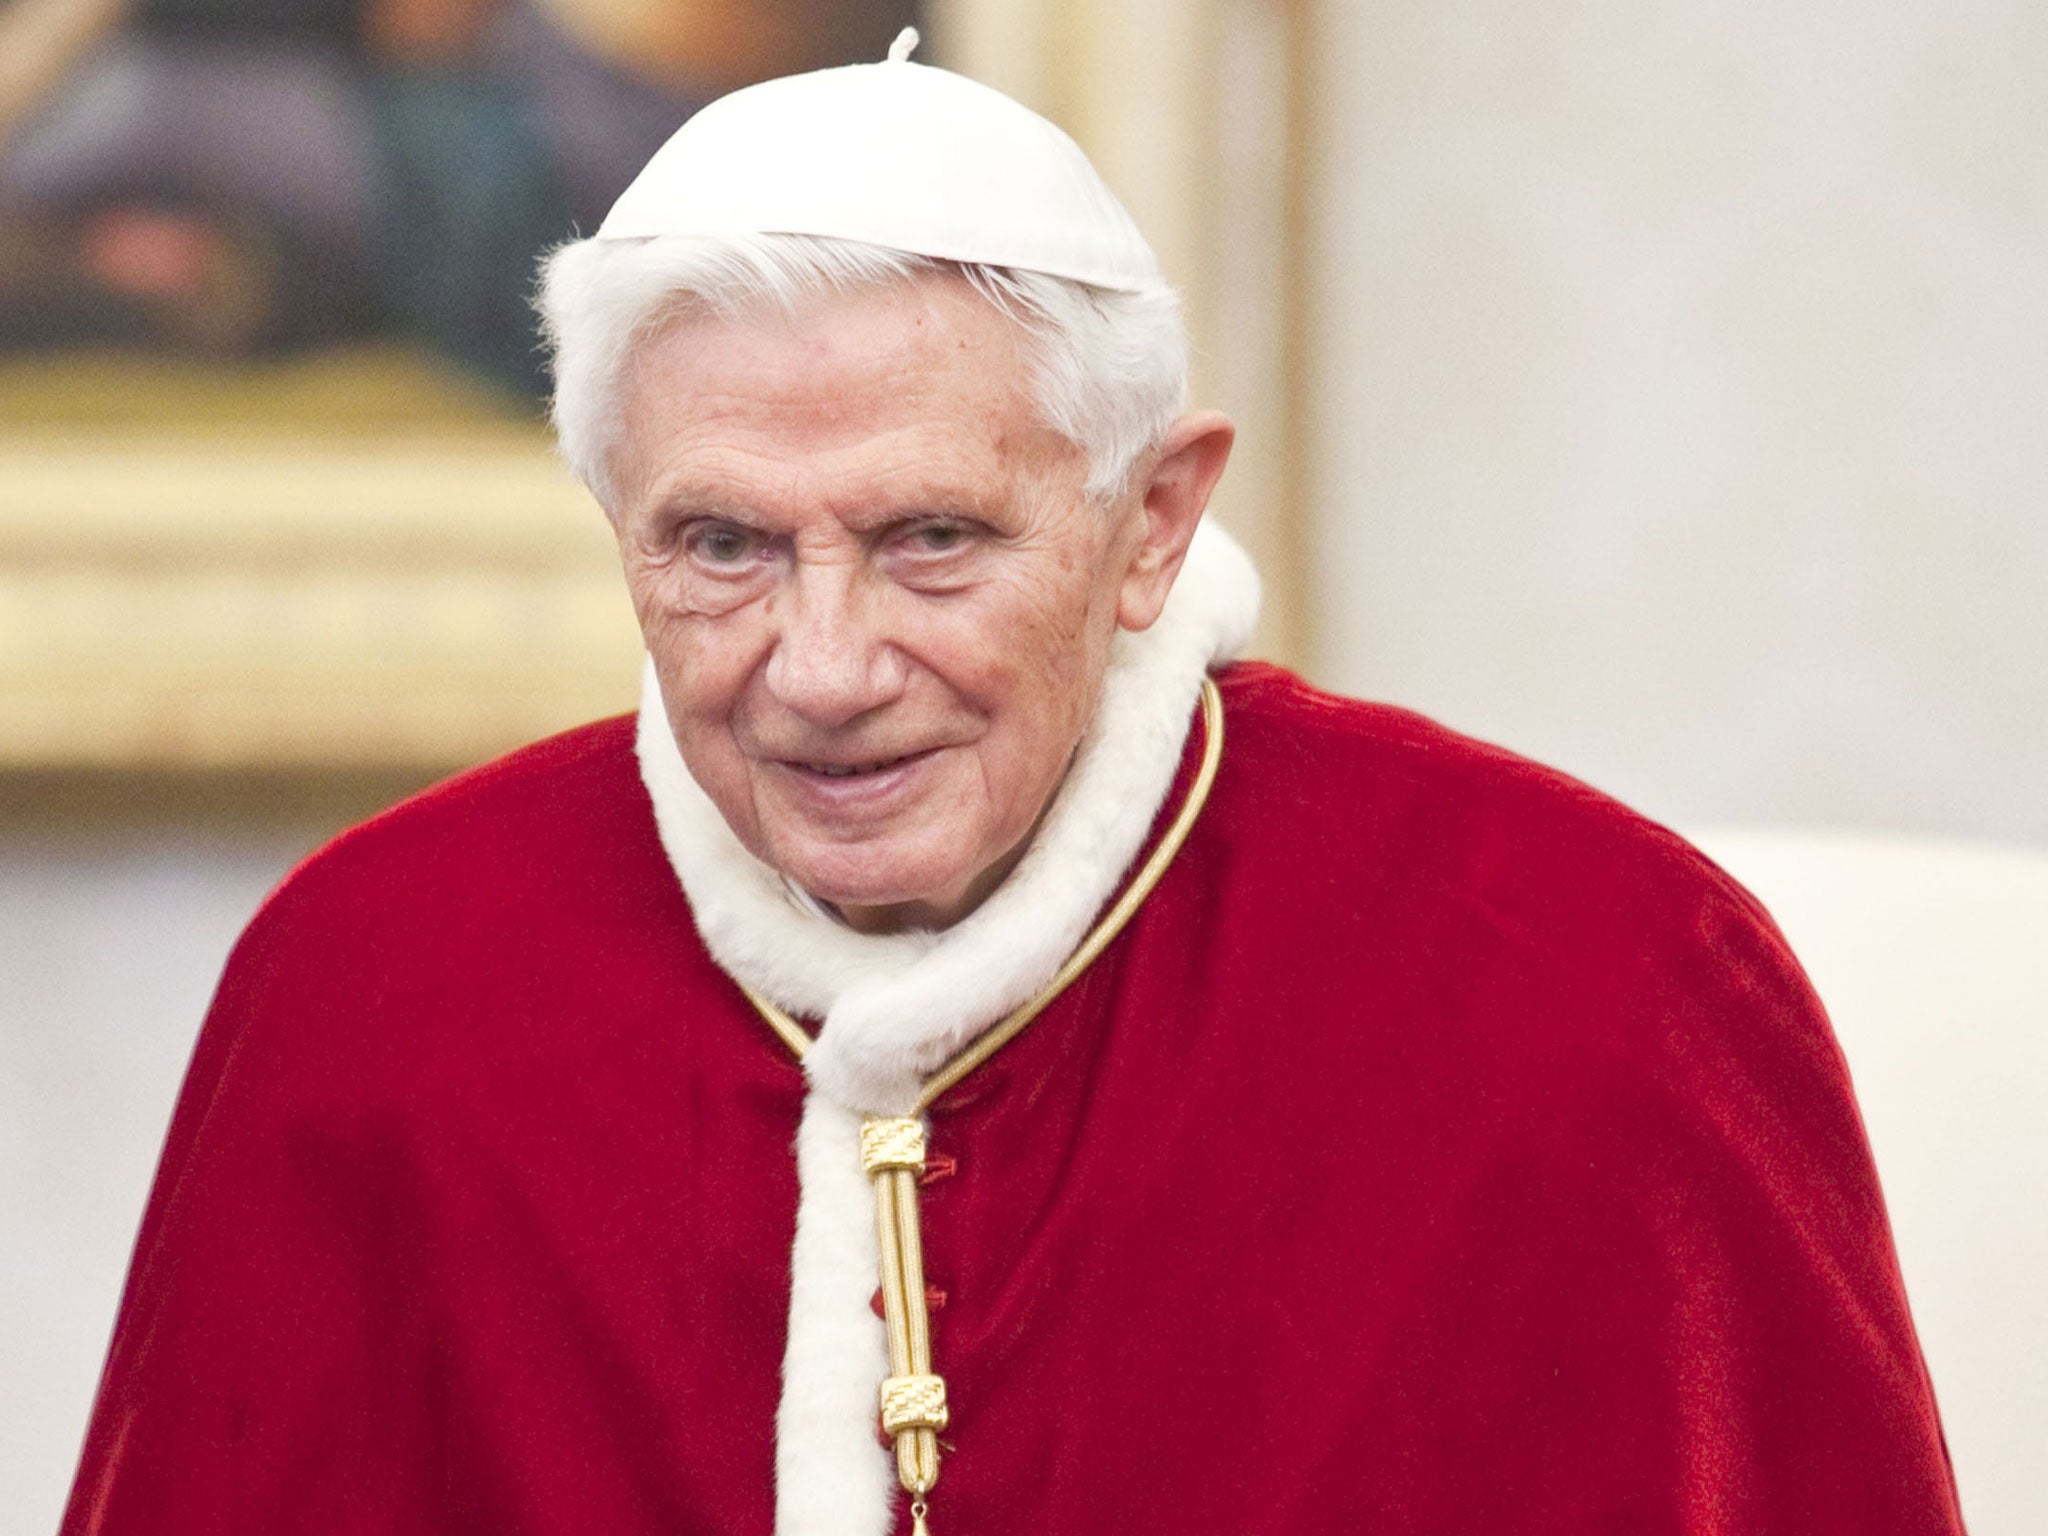 Pope Benedict XVI surprised the world by announcing his resignation